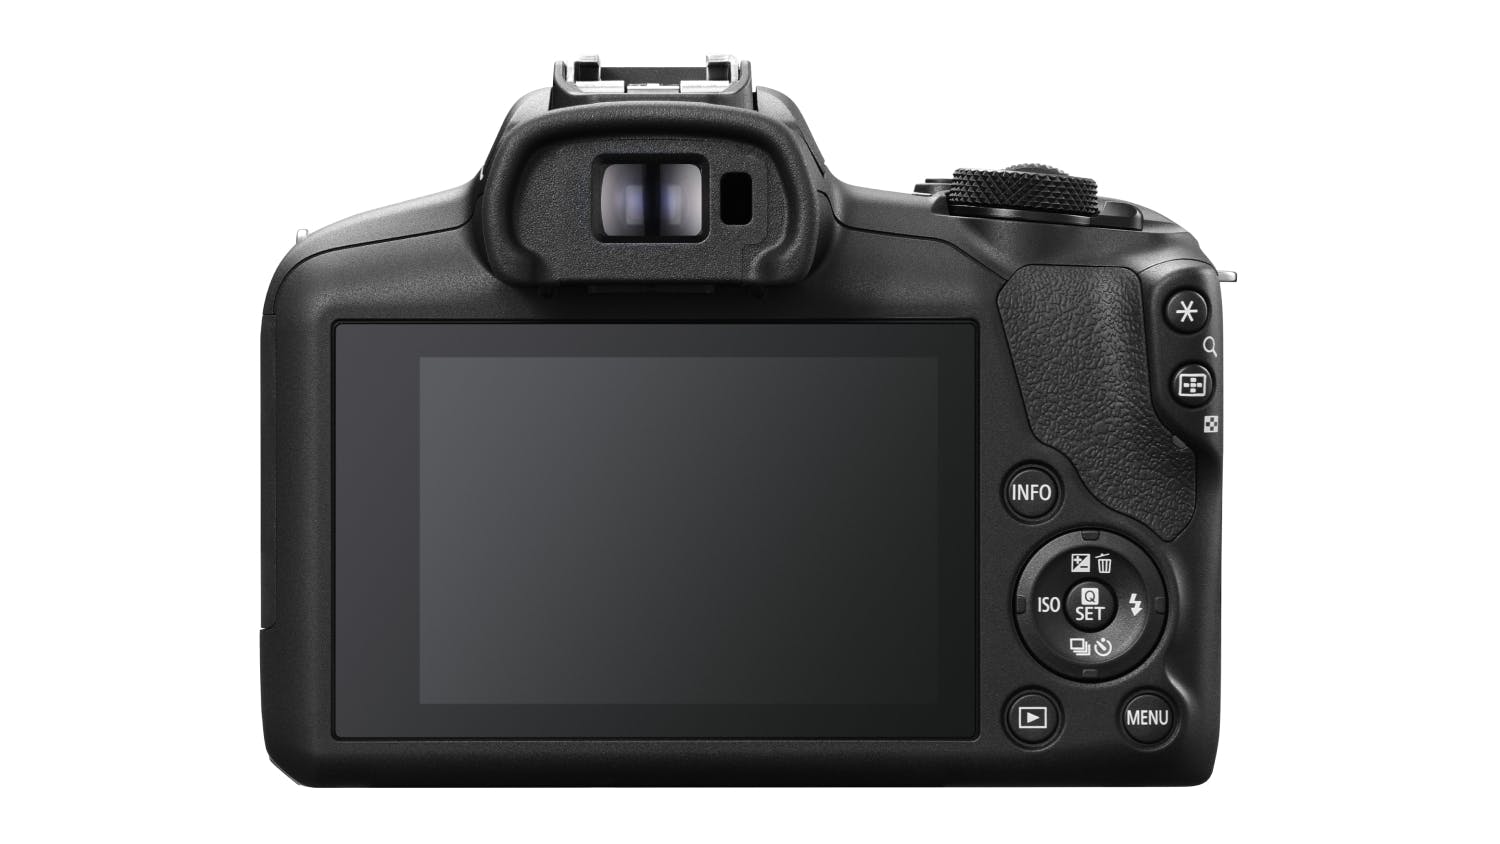 Canon EOS R100 Mirrorless Camera with RF-S 18-45mm f/4.5-6.3 IS STM Lens